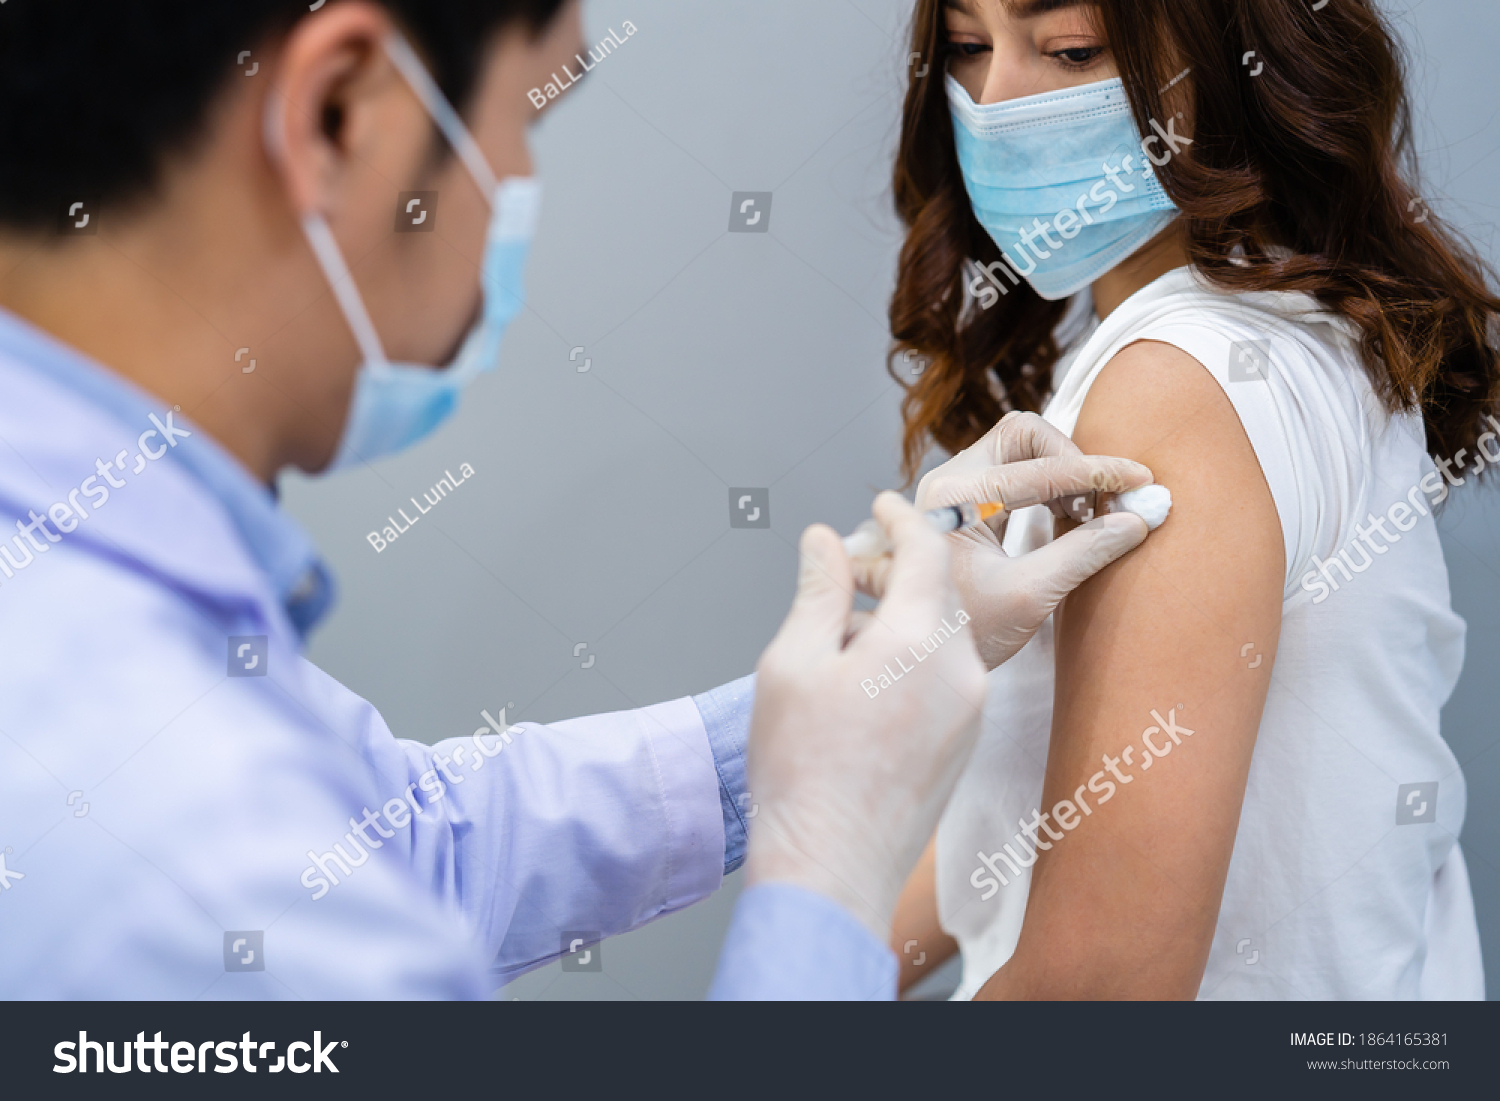 doctor holding syringe and using cotton before make injection to patient in a medical mask. Covid-19 or coronavirus vaccine #1864165381